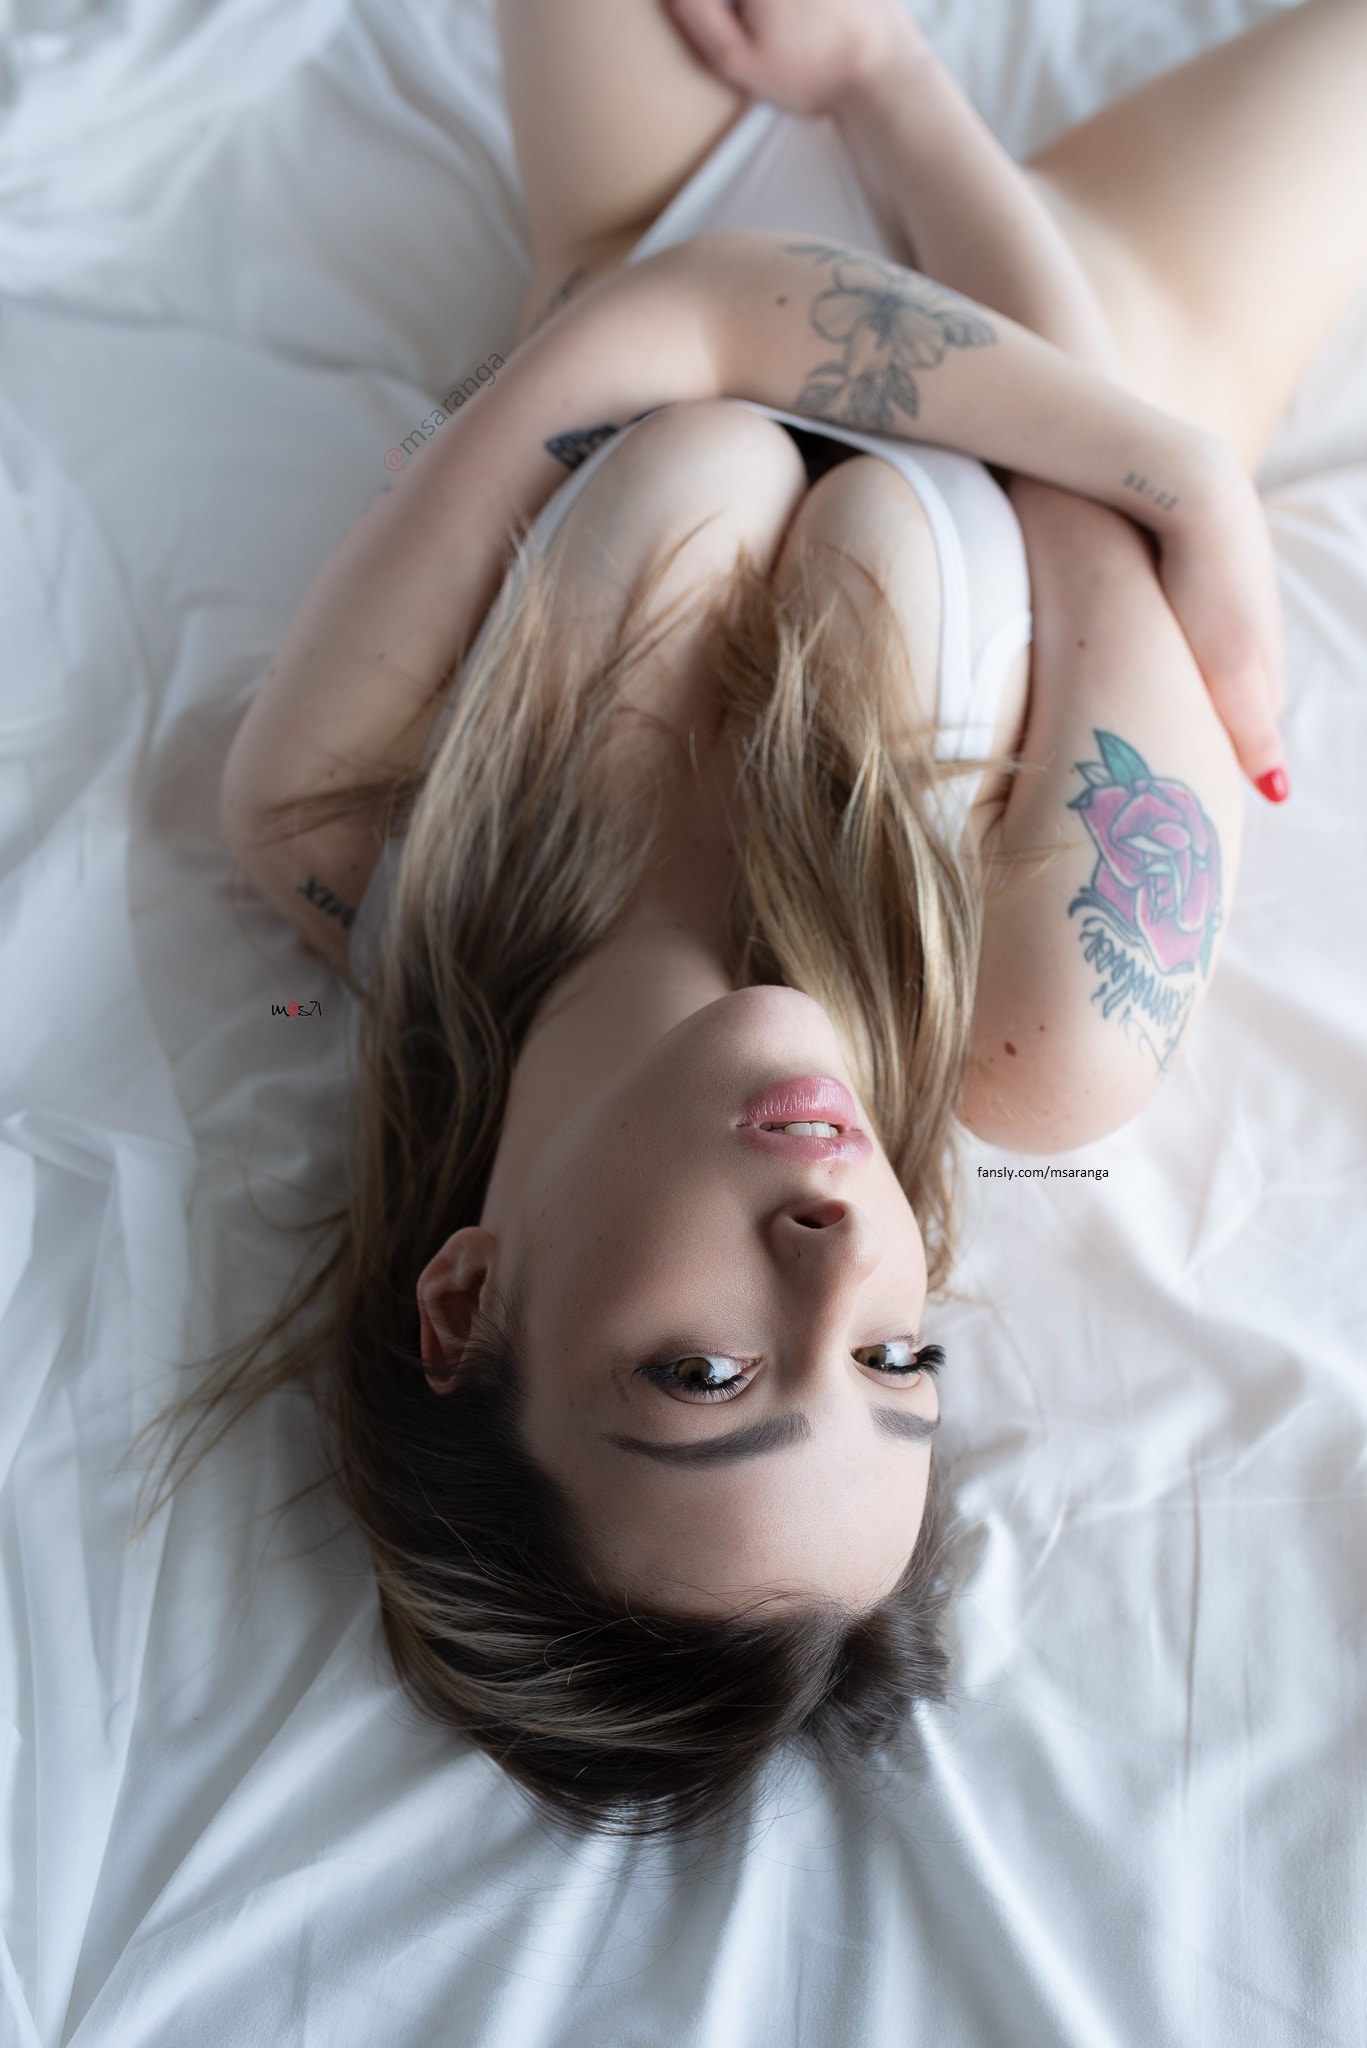 People 1367x2048 Mauro Saranga women ombre hair lingerie cleavage tattoo upside down bed watermarked portrait display